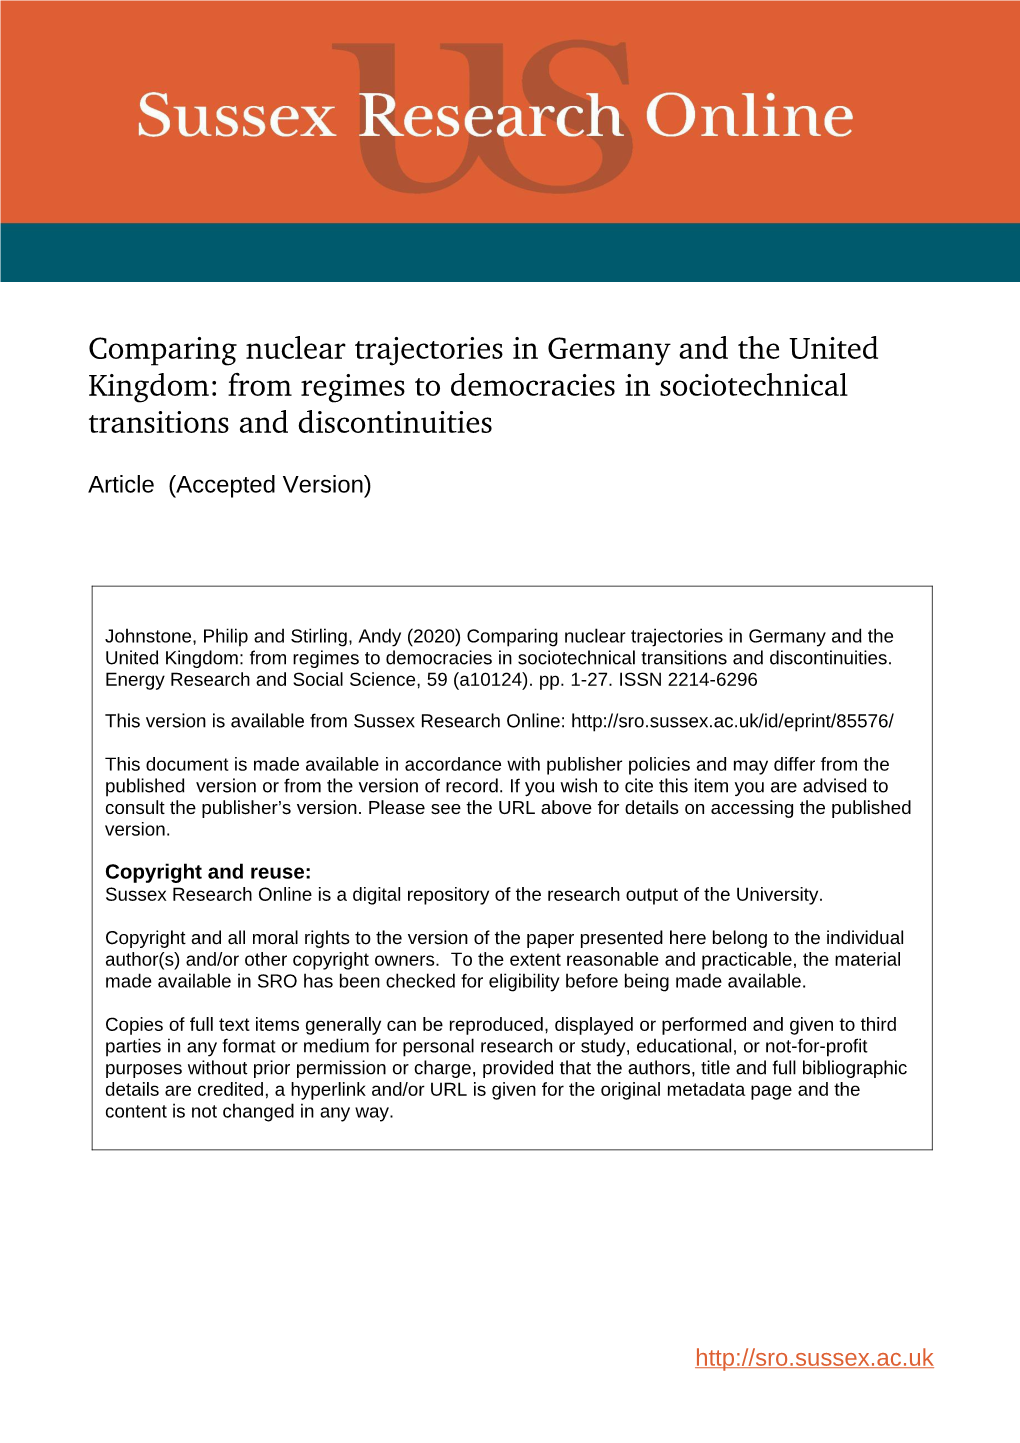 Comparing Nuclear Trajectories in Germany and the United Kingdom: from Regimes to Democracies in Sociotechnical Transitions and Discontinuities